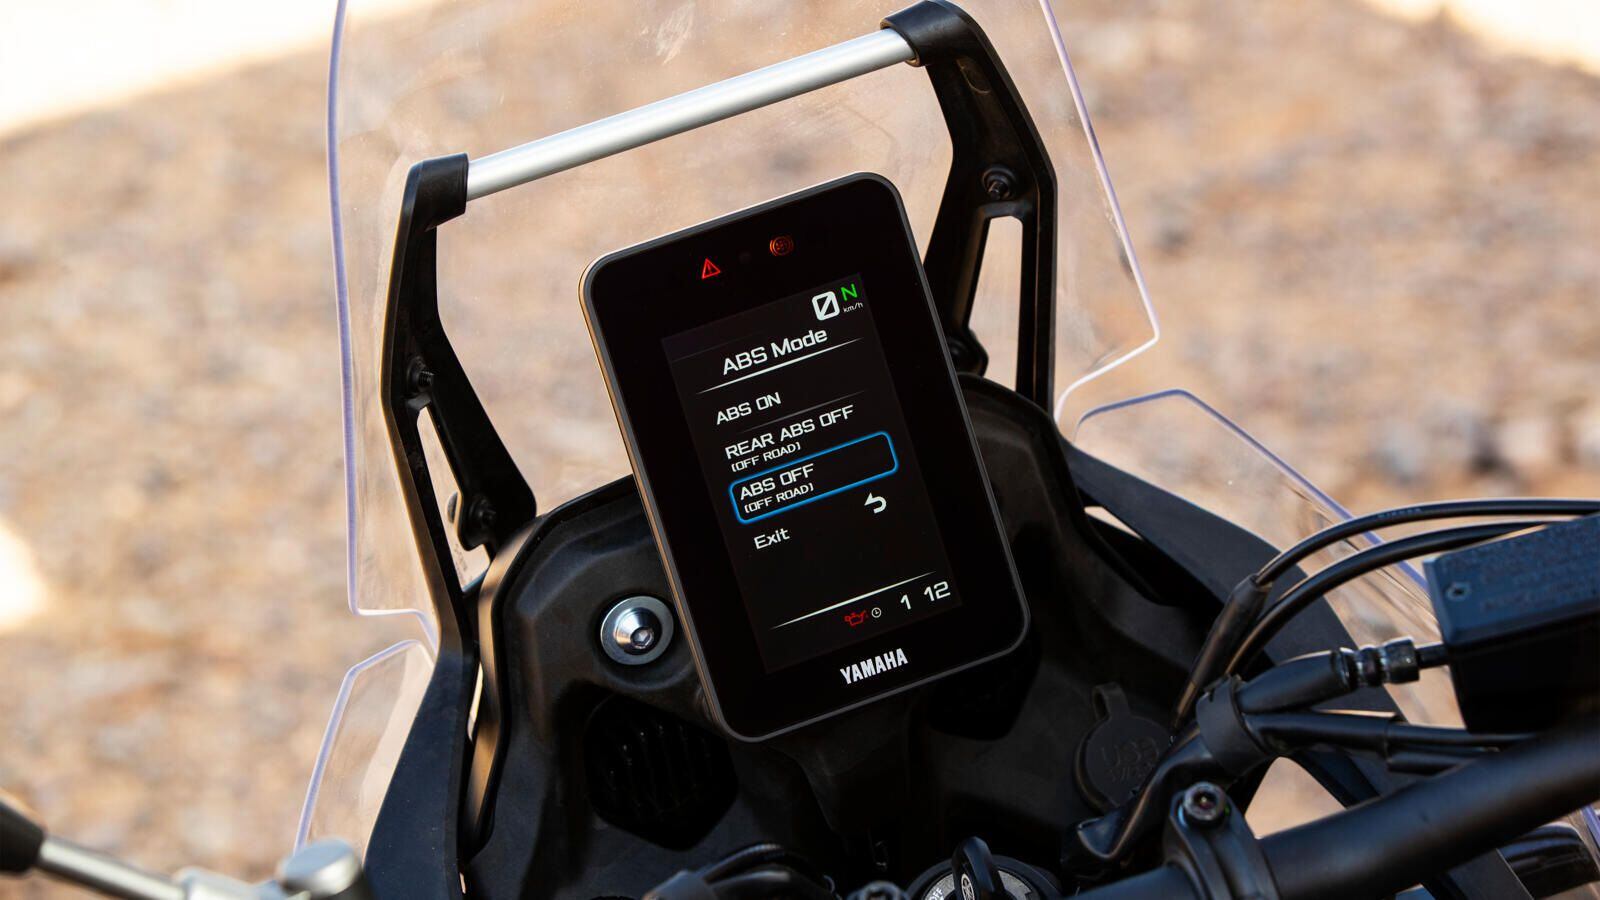 Three-mode ABS can also be configured from the dash to suit rider preferences or switched off altogether.